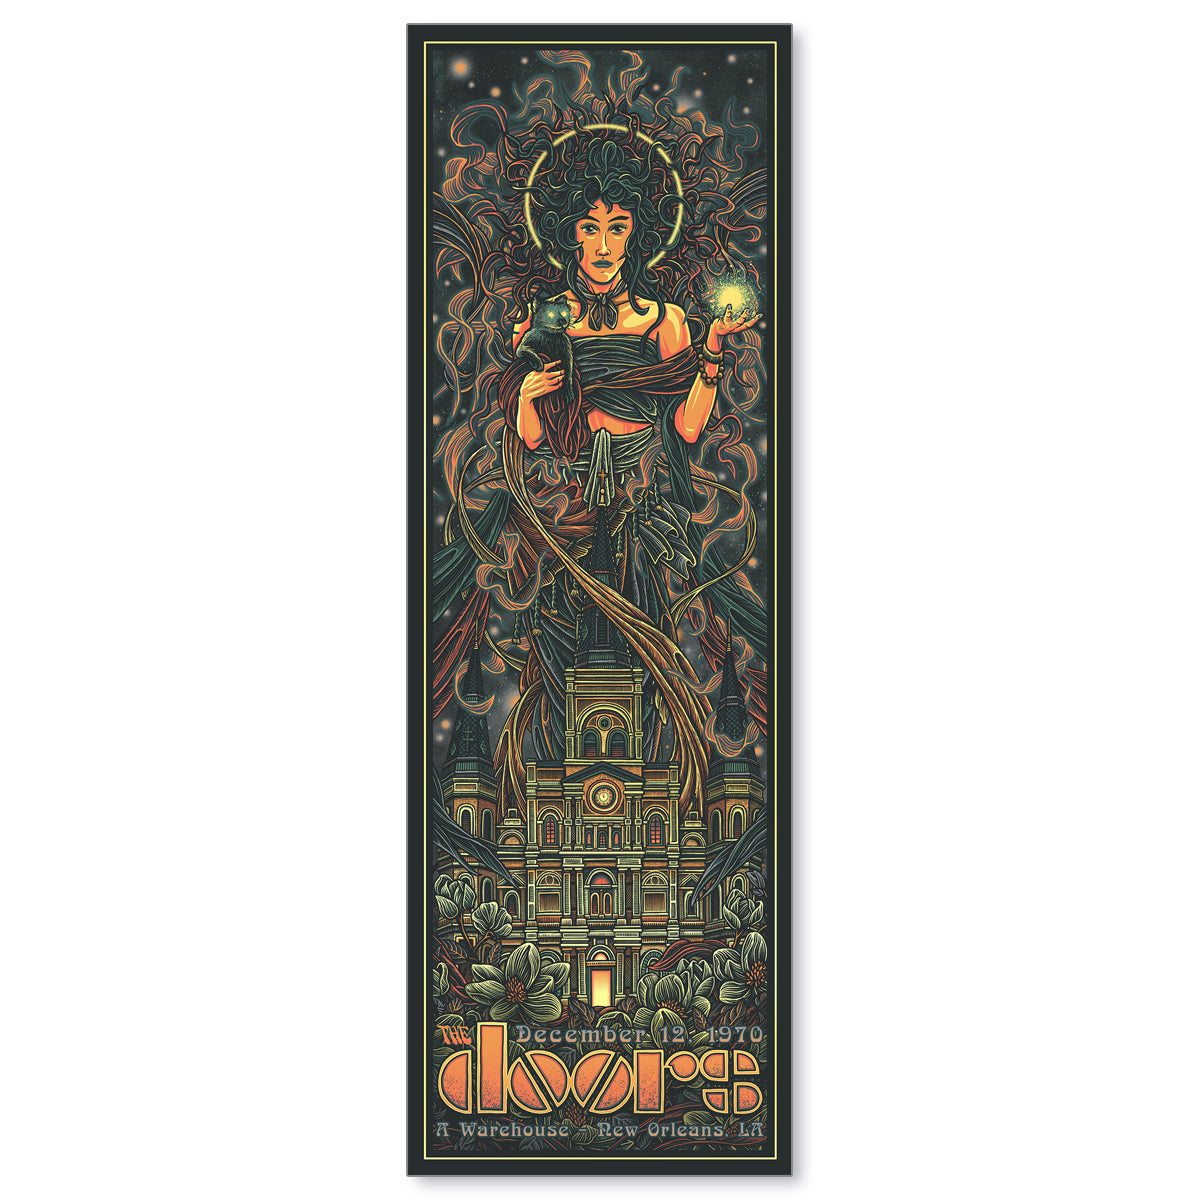 The Doors New Orleans 1970 by Luke Martin (Variant Edition Foil)